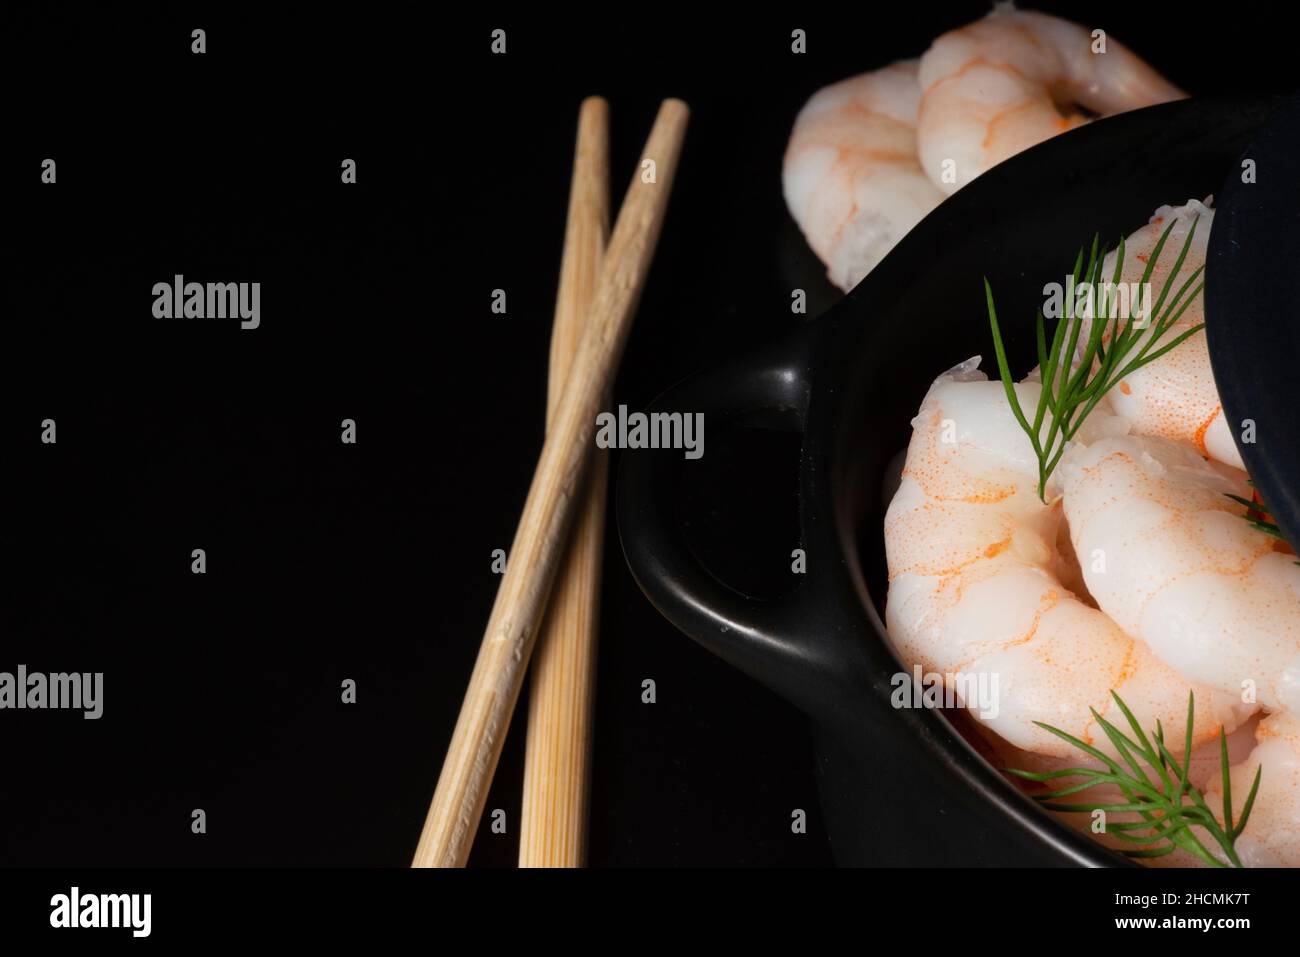 Close up side view detail of fresh cooked peeled prawns or shrimps in dark bowl and chop sticks on black background Stock Photo